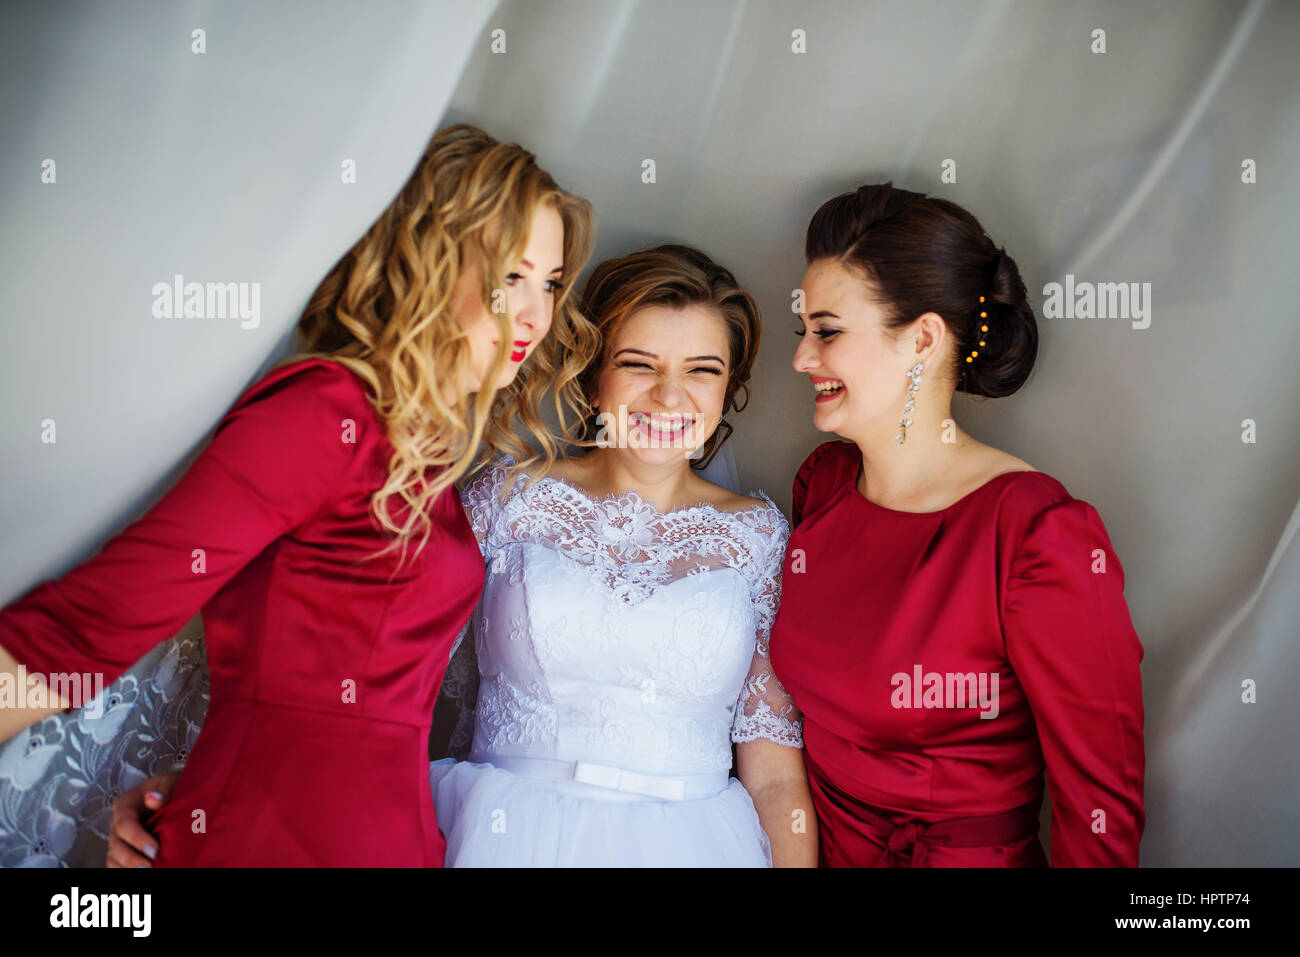 Cute blonde bride with bridesmaids posed on curtains at wedding morning day. Stock Photo